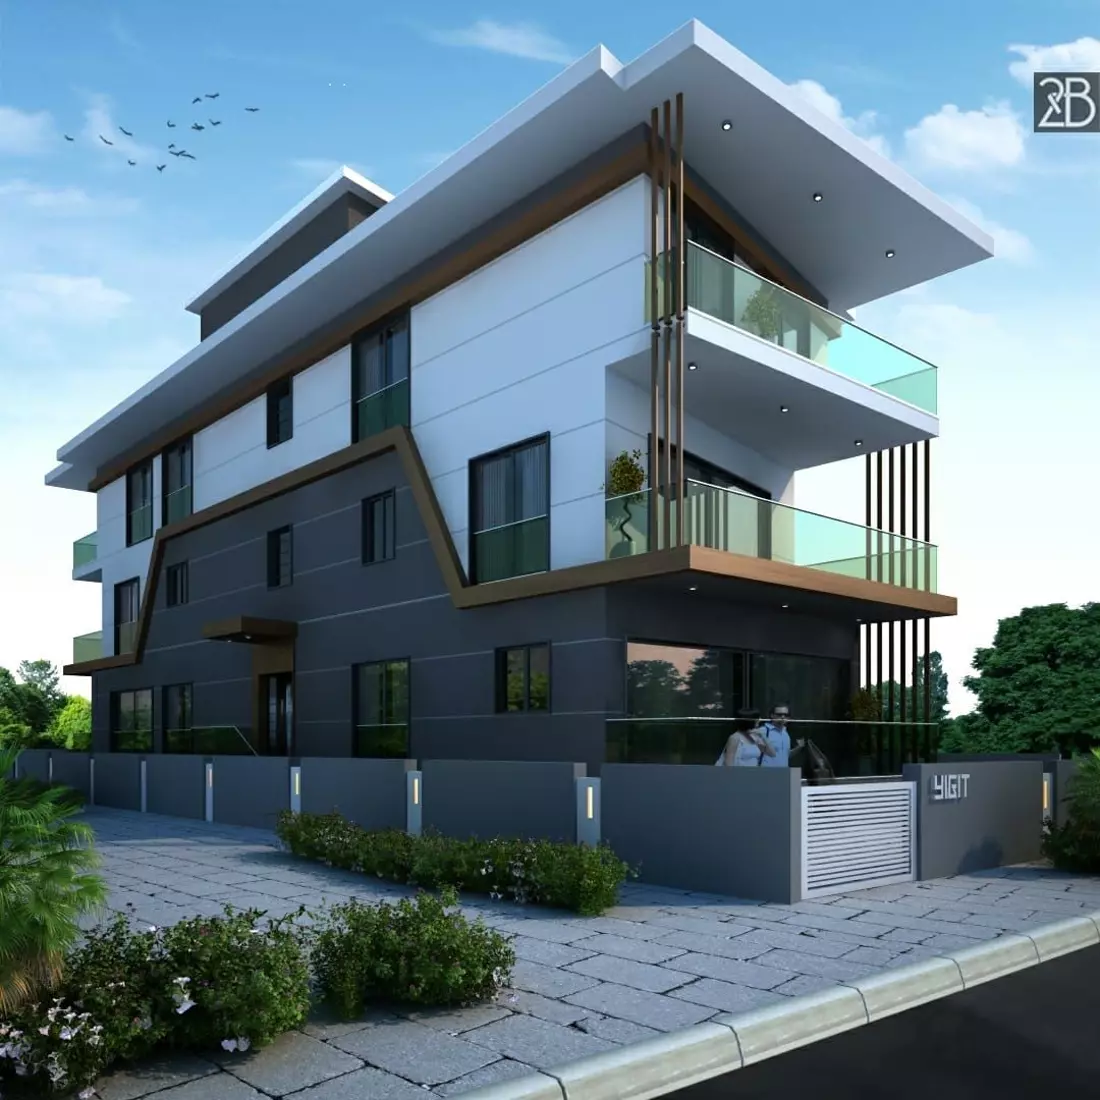 New 3 bedroom smart apartment project at the center of Marmaris.